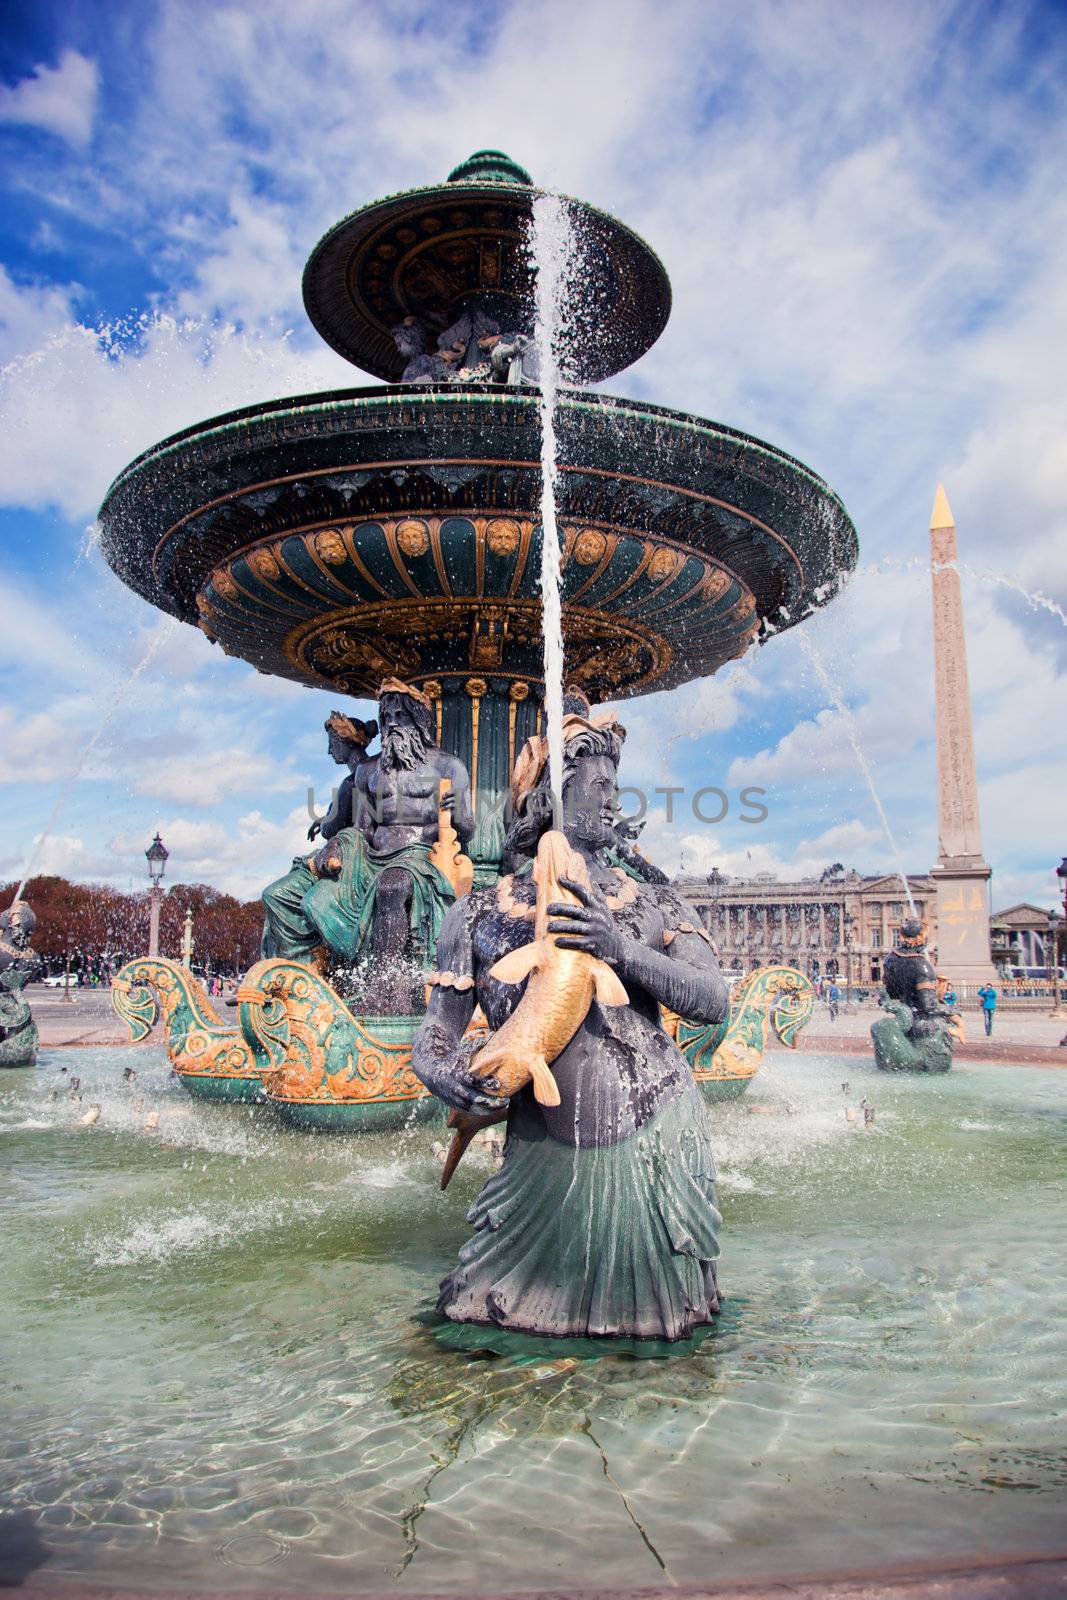 Fountain in Jardin des Tuileries Paris, France.  by photocreo